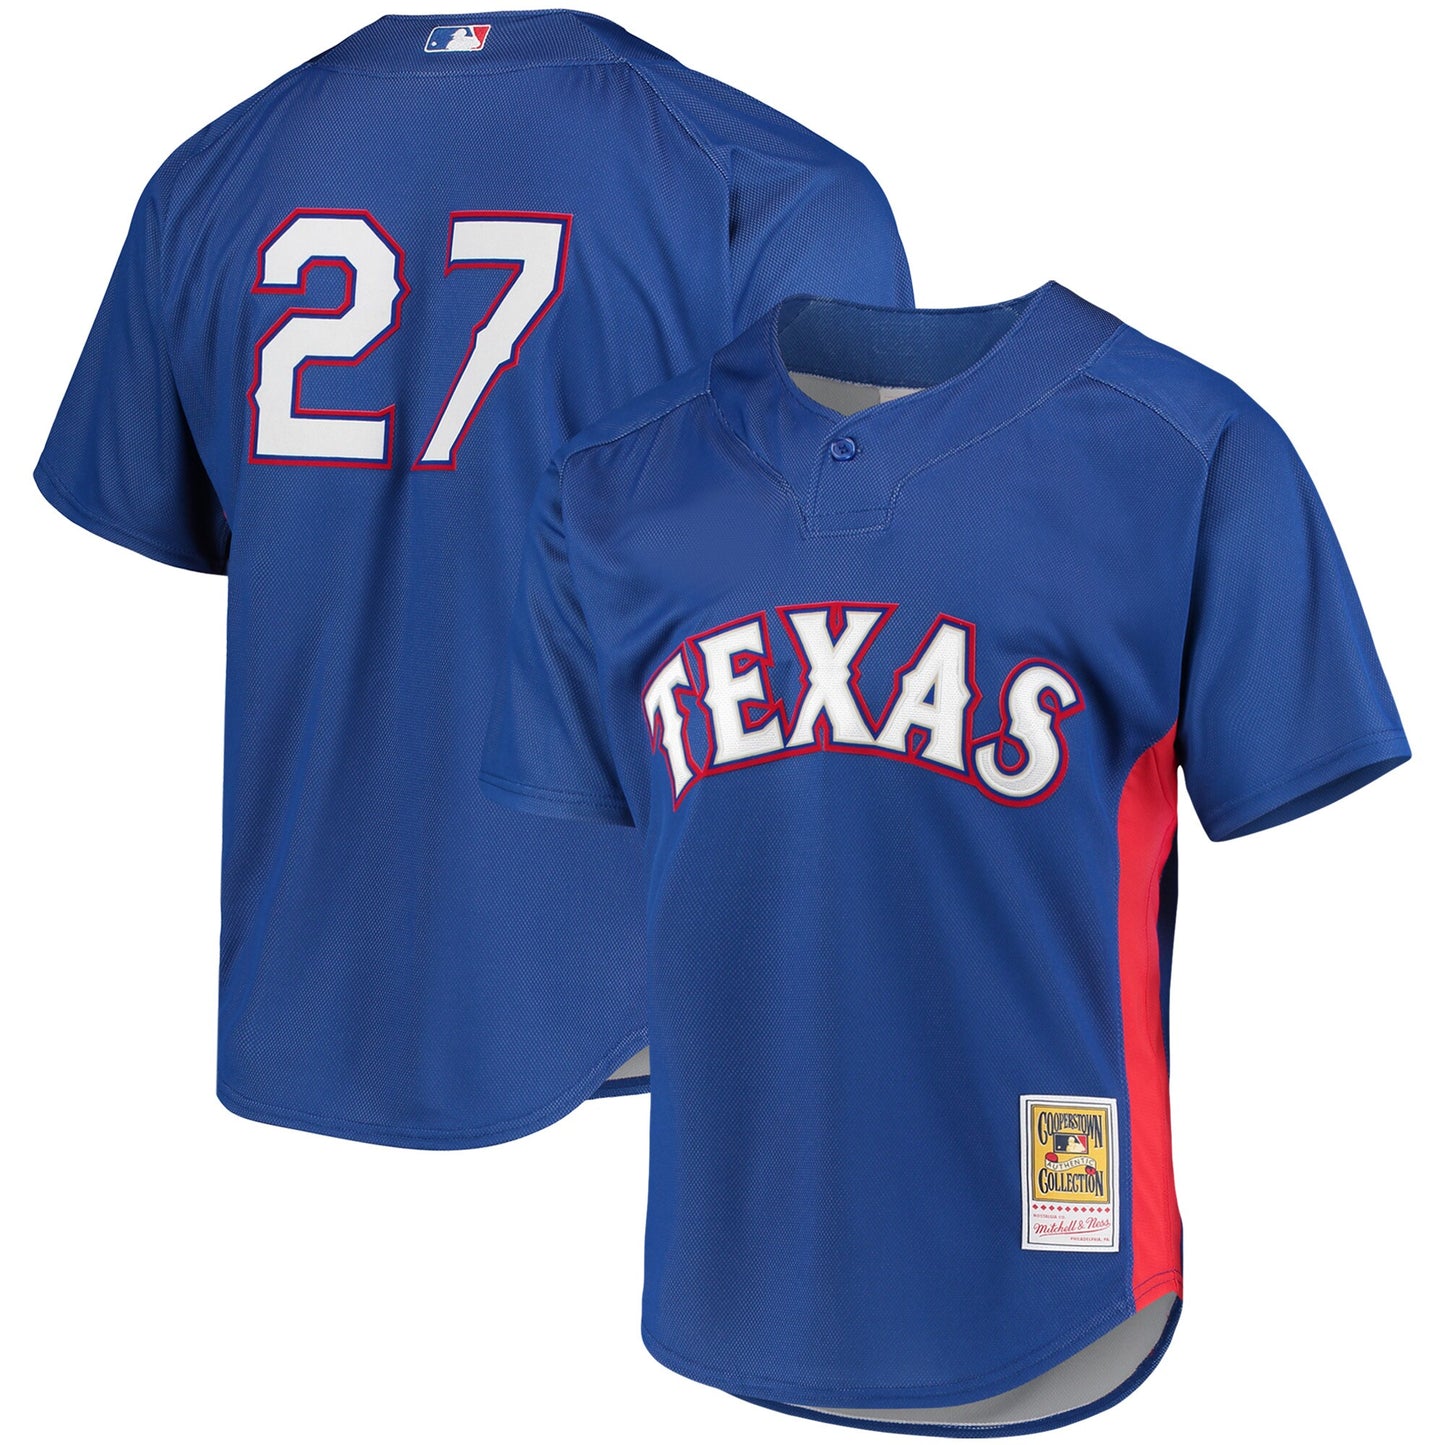 Vladimir Guerrero Texas Rangers Mitchell & Ness Cooperstown Collection Mesh Batting Practice Button-Up Jersey - Royal